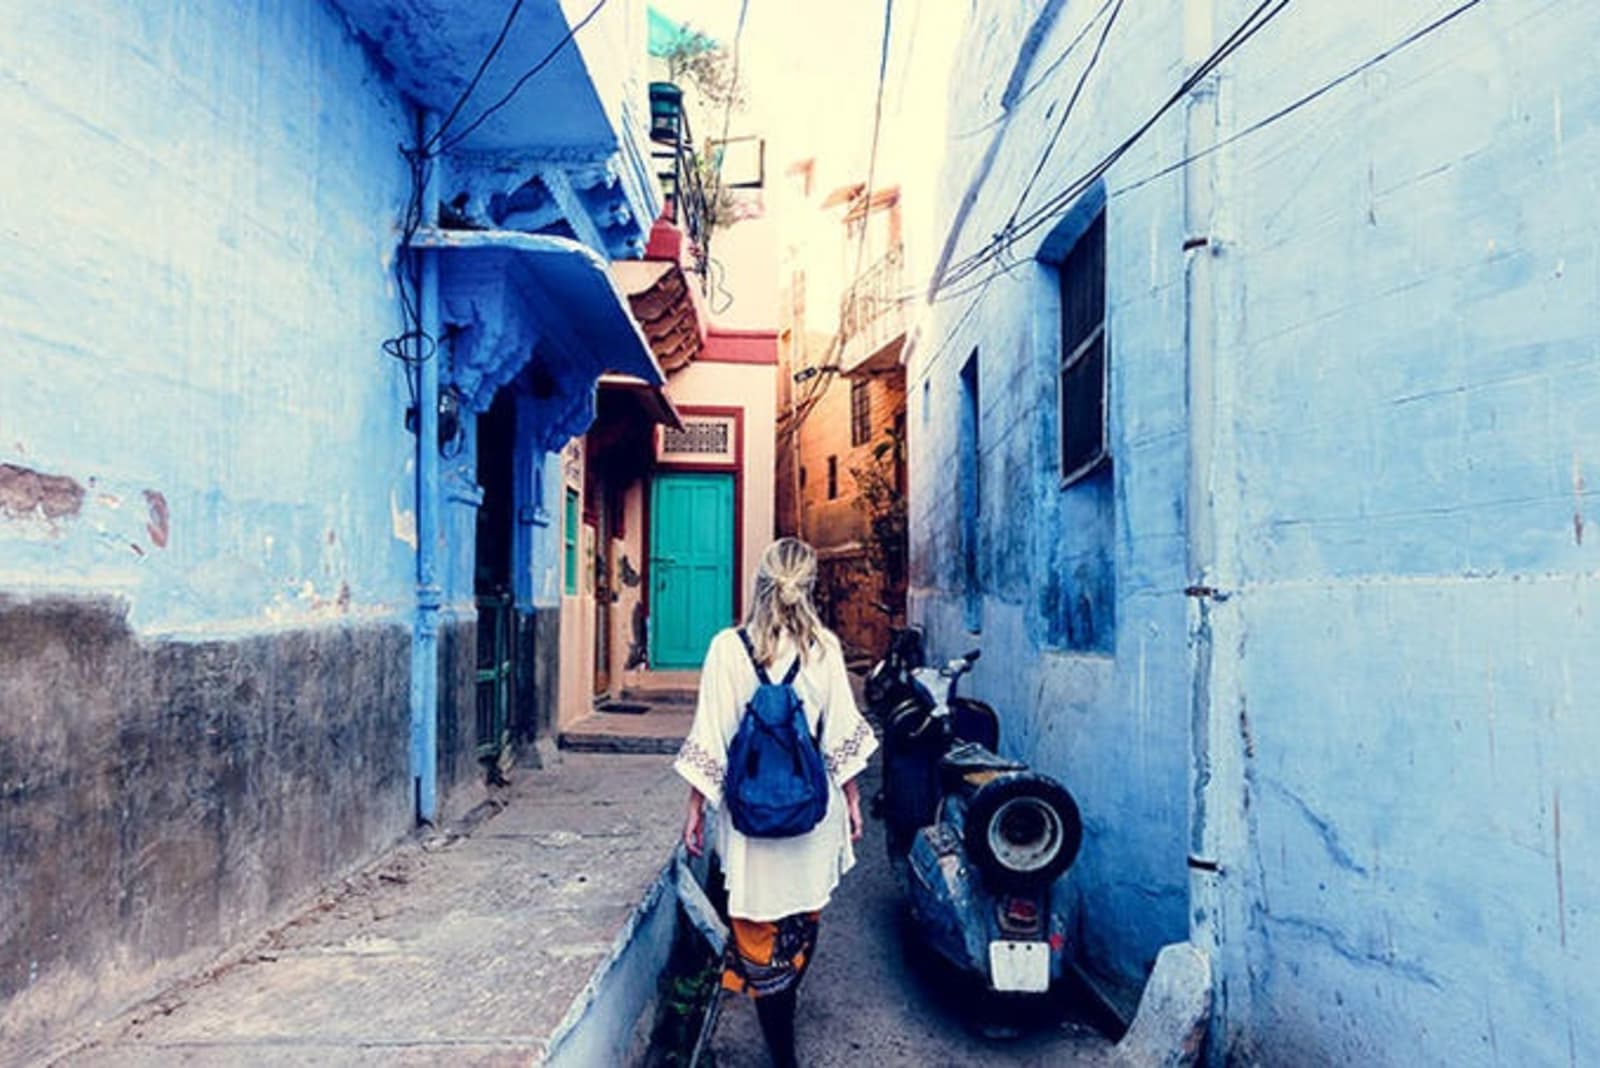 Image of the back of a woman walking through a blue painted alleyway.